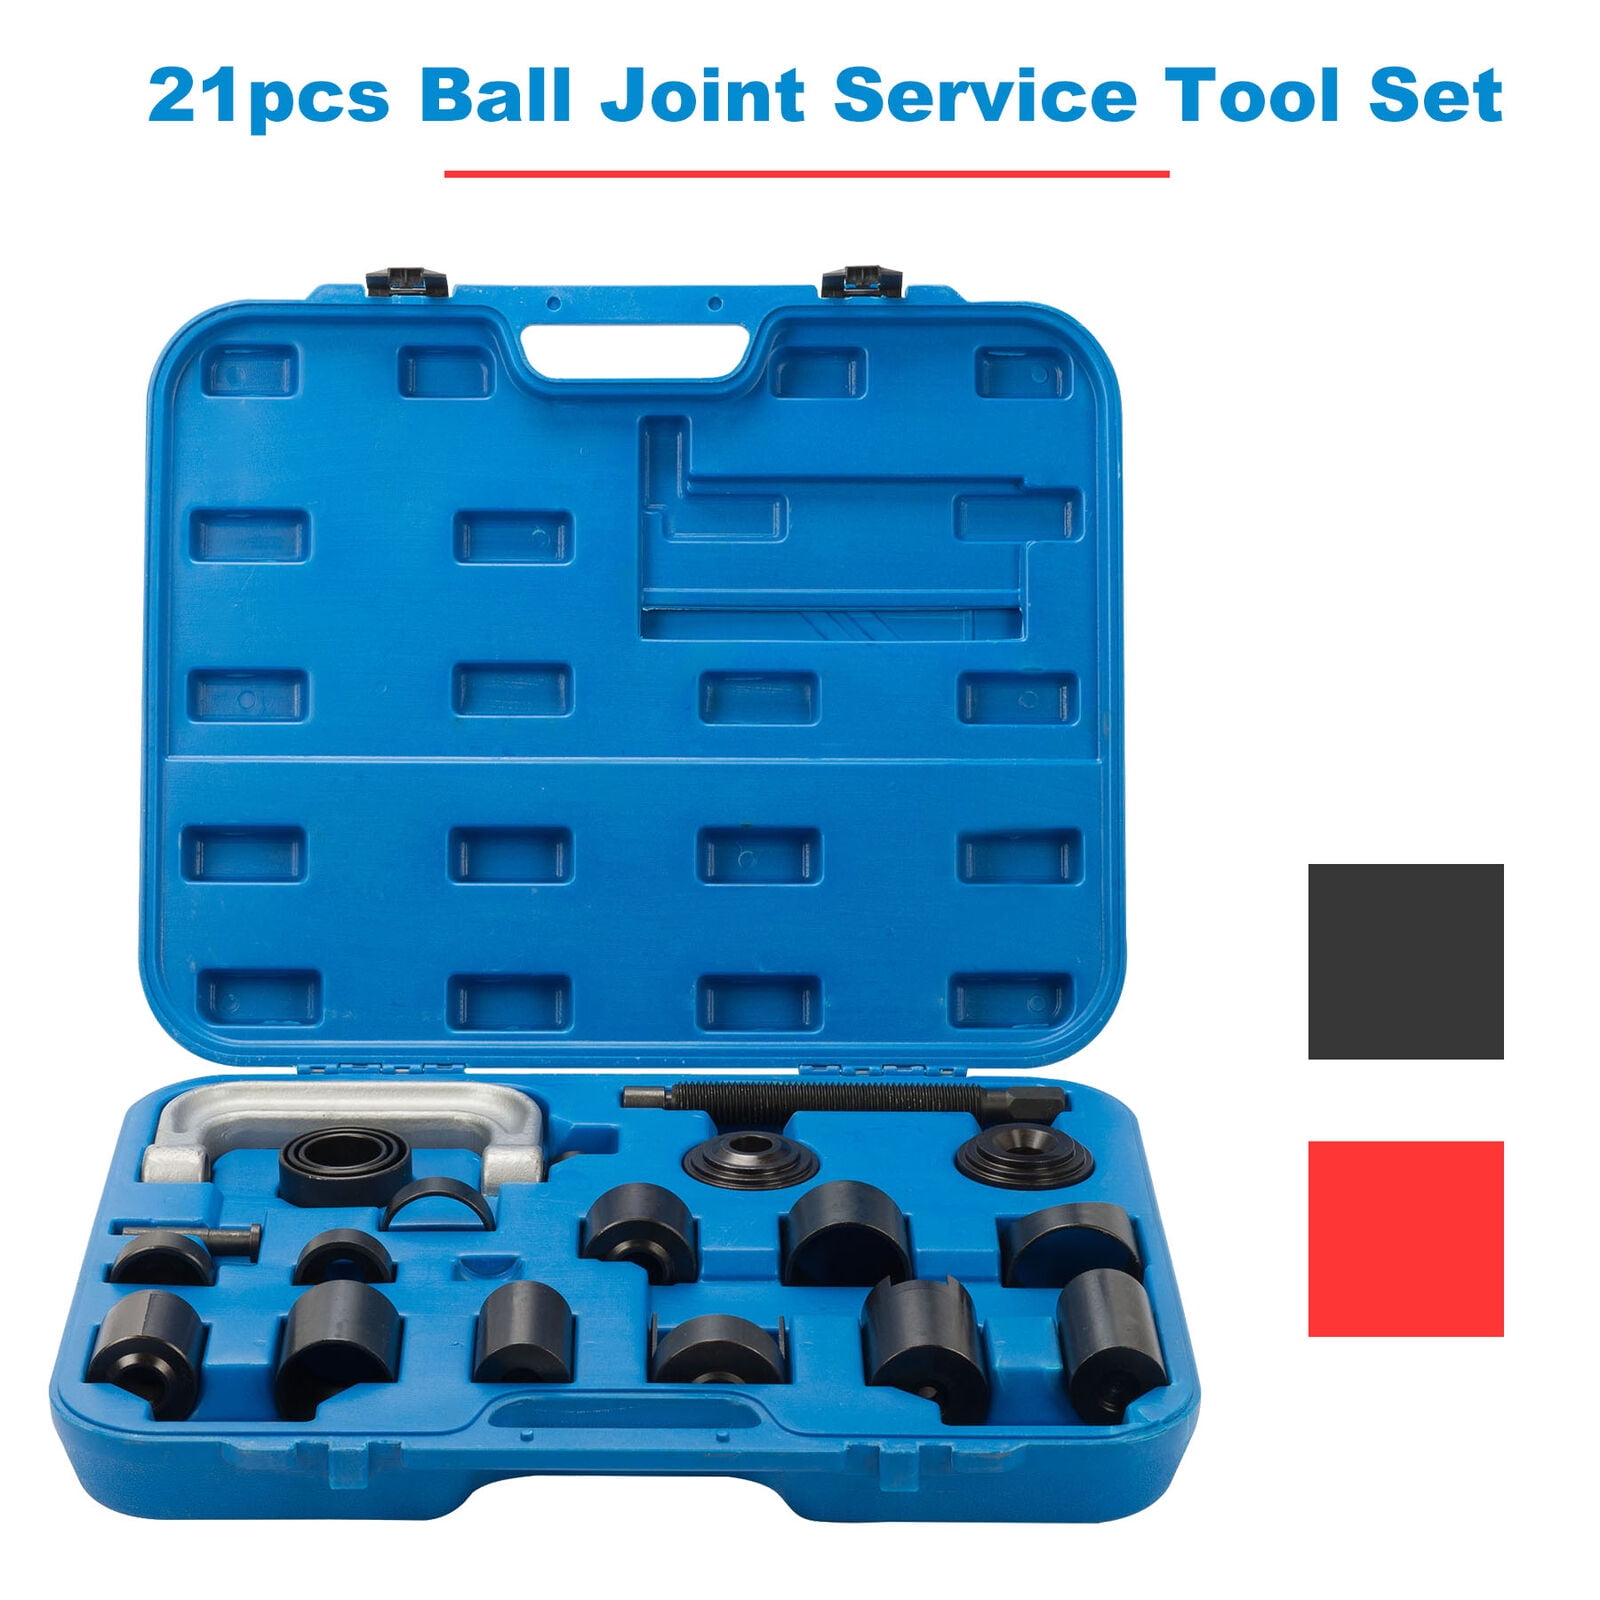 10PCS With 4x4 Adapters for Most 2WD 4WD Car Light Trucks Three T 10PCS//21PCS Ball Joint Press U Joint Remover Service Kit